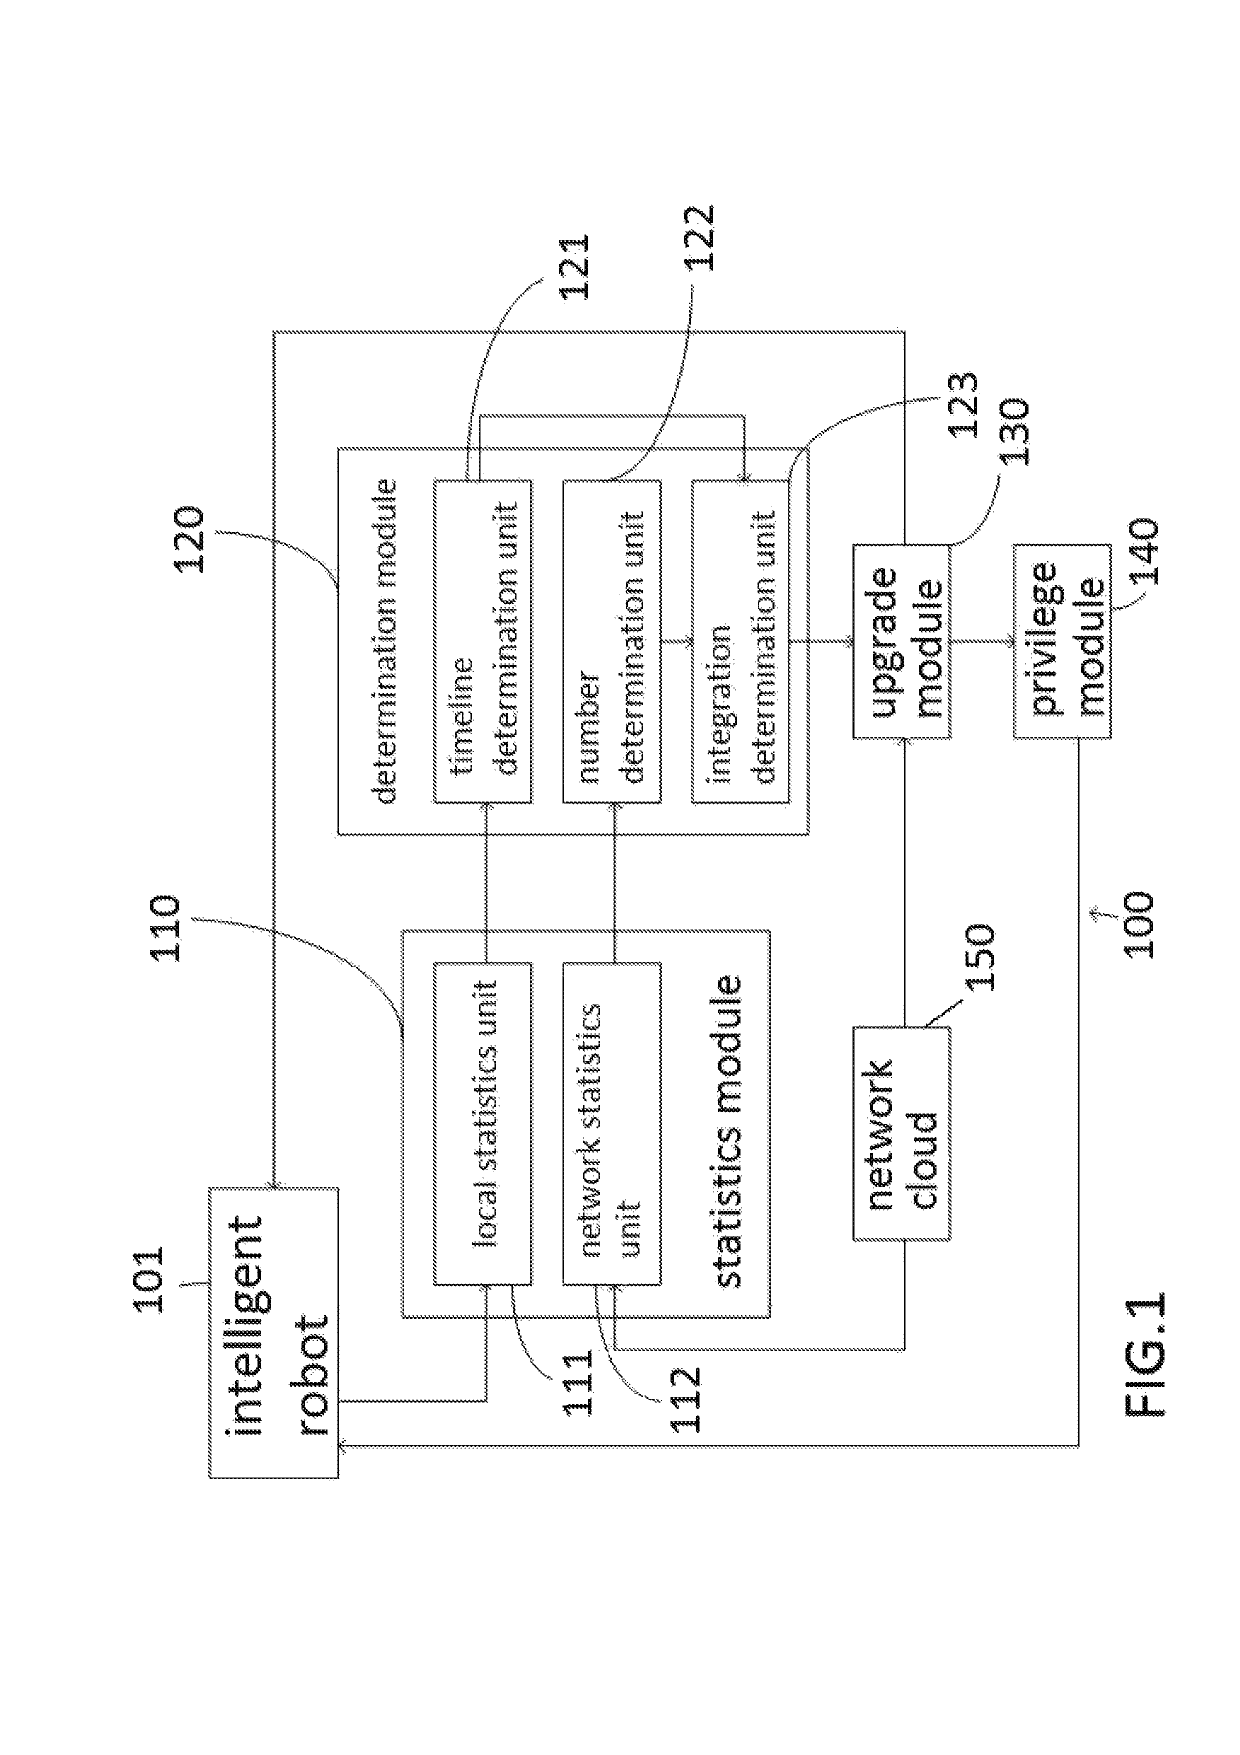 Single skill package upgrade management apparatus and method thereof